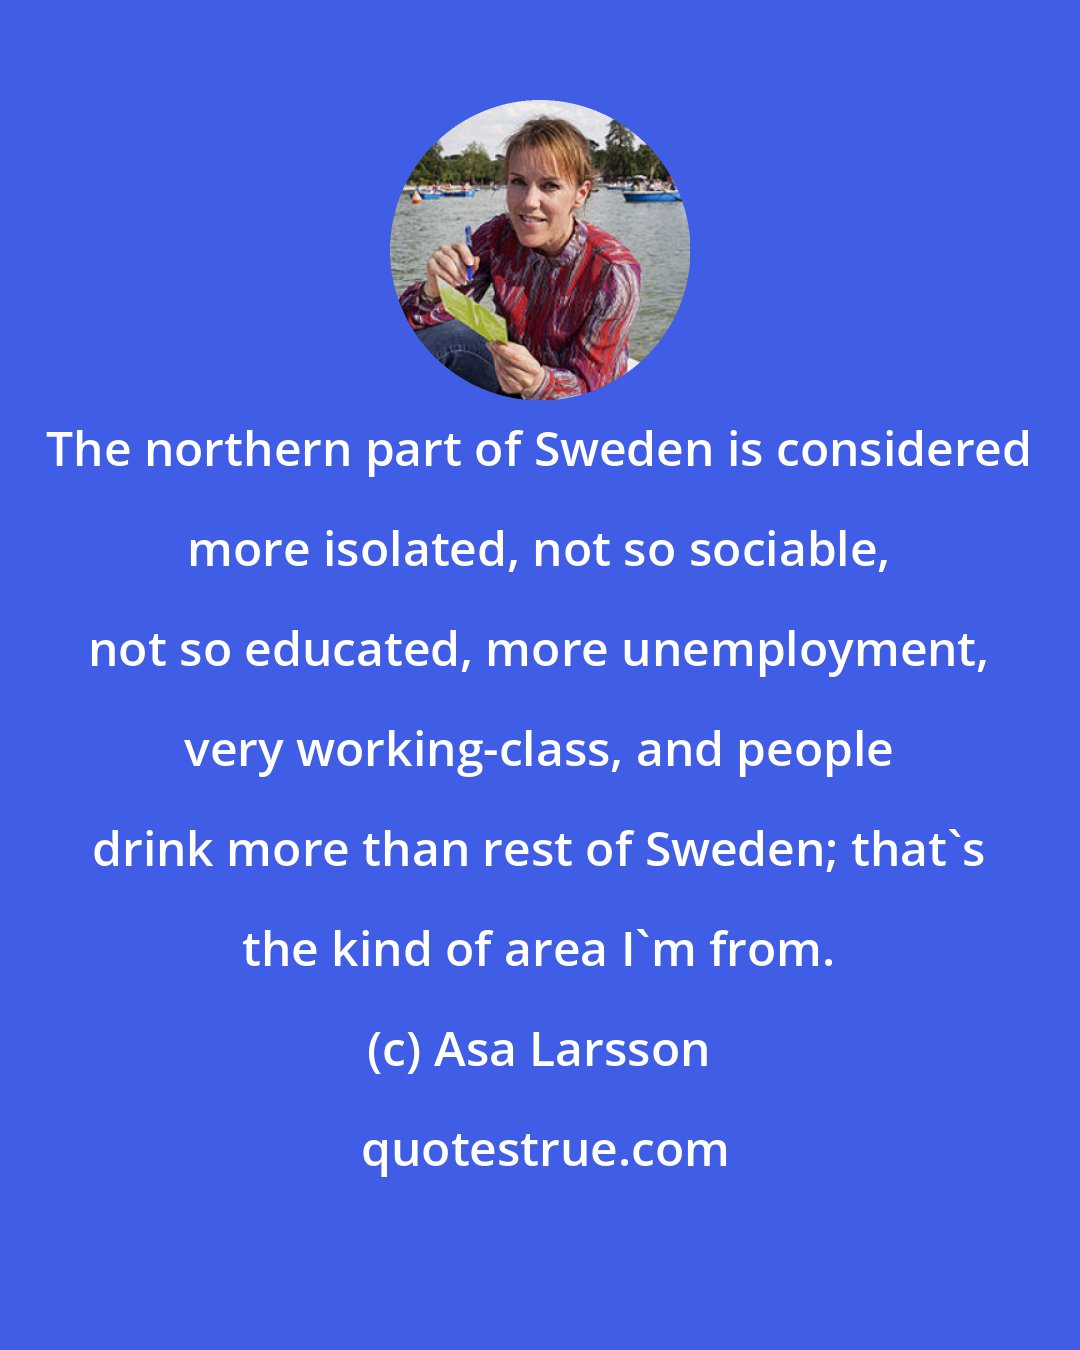 Asa Larsson: The northern part of Sweden is considered more isolated, not so sociable, not so educated, more unemployment, very working-class, and people drink more than rest of Sweden; that's the kind of area I'm from.